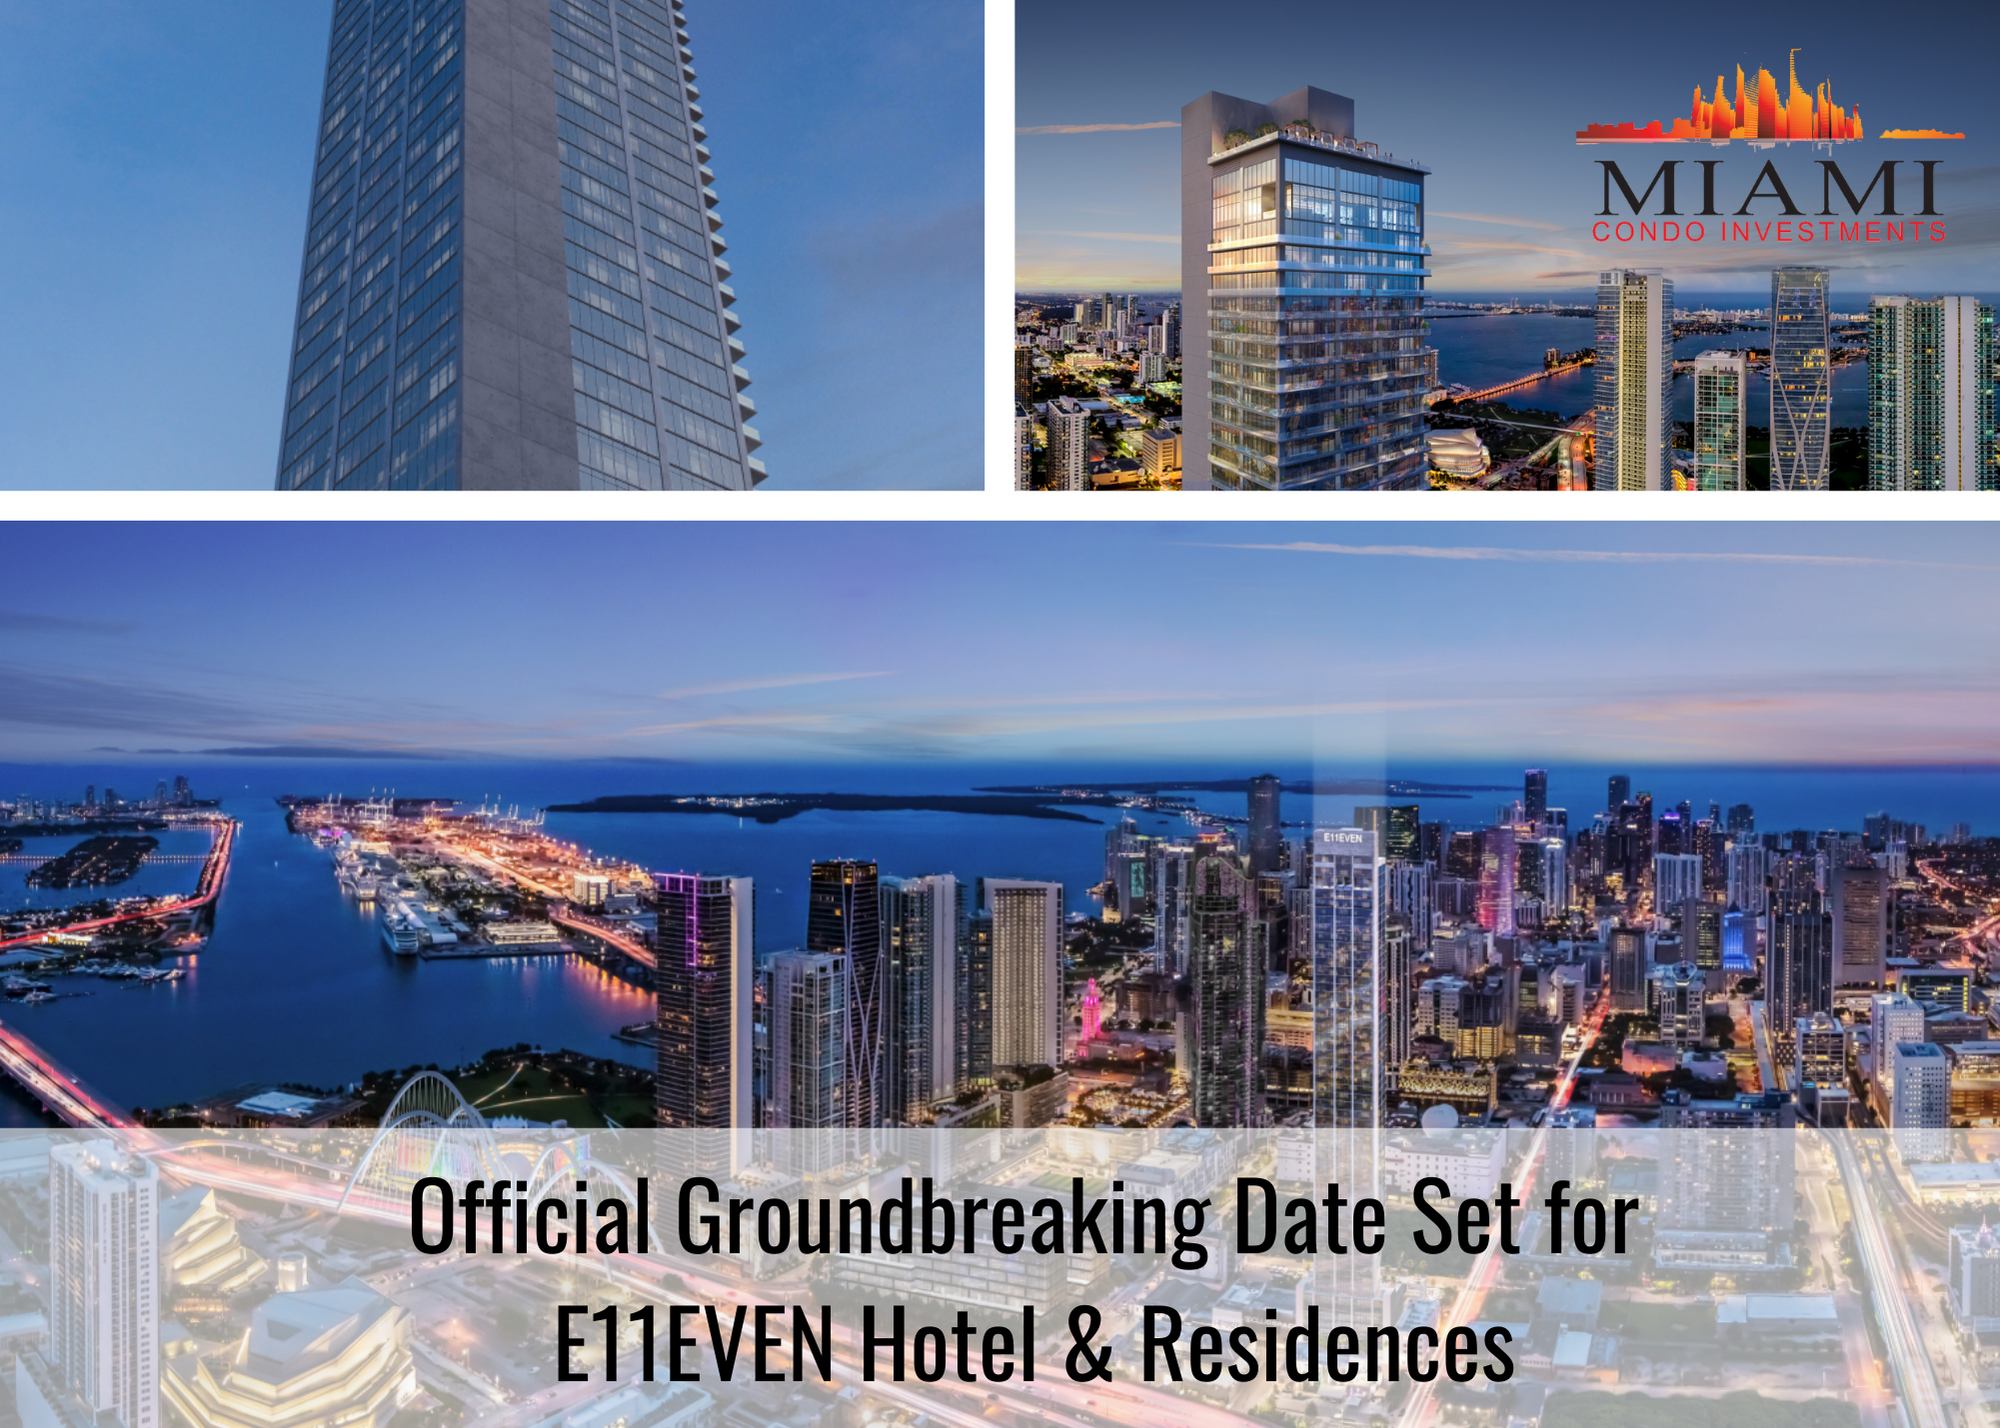 E11EVEN Hotel & Residences Receives Official Groundbreaking Date